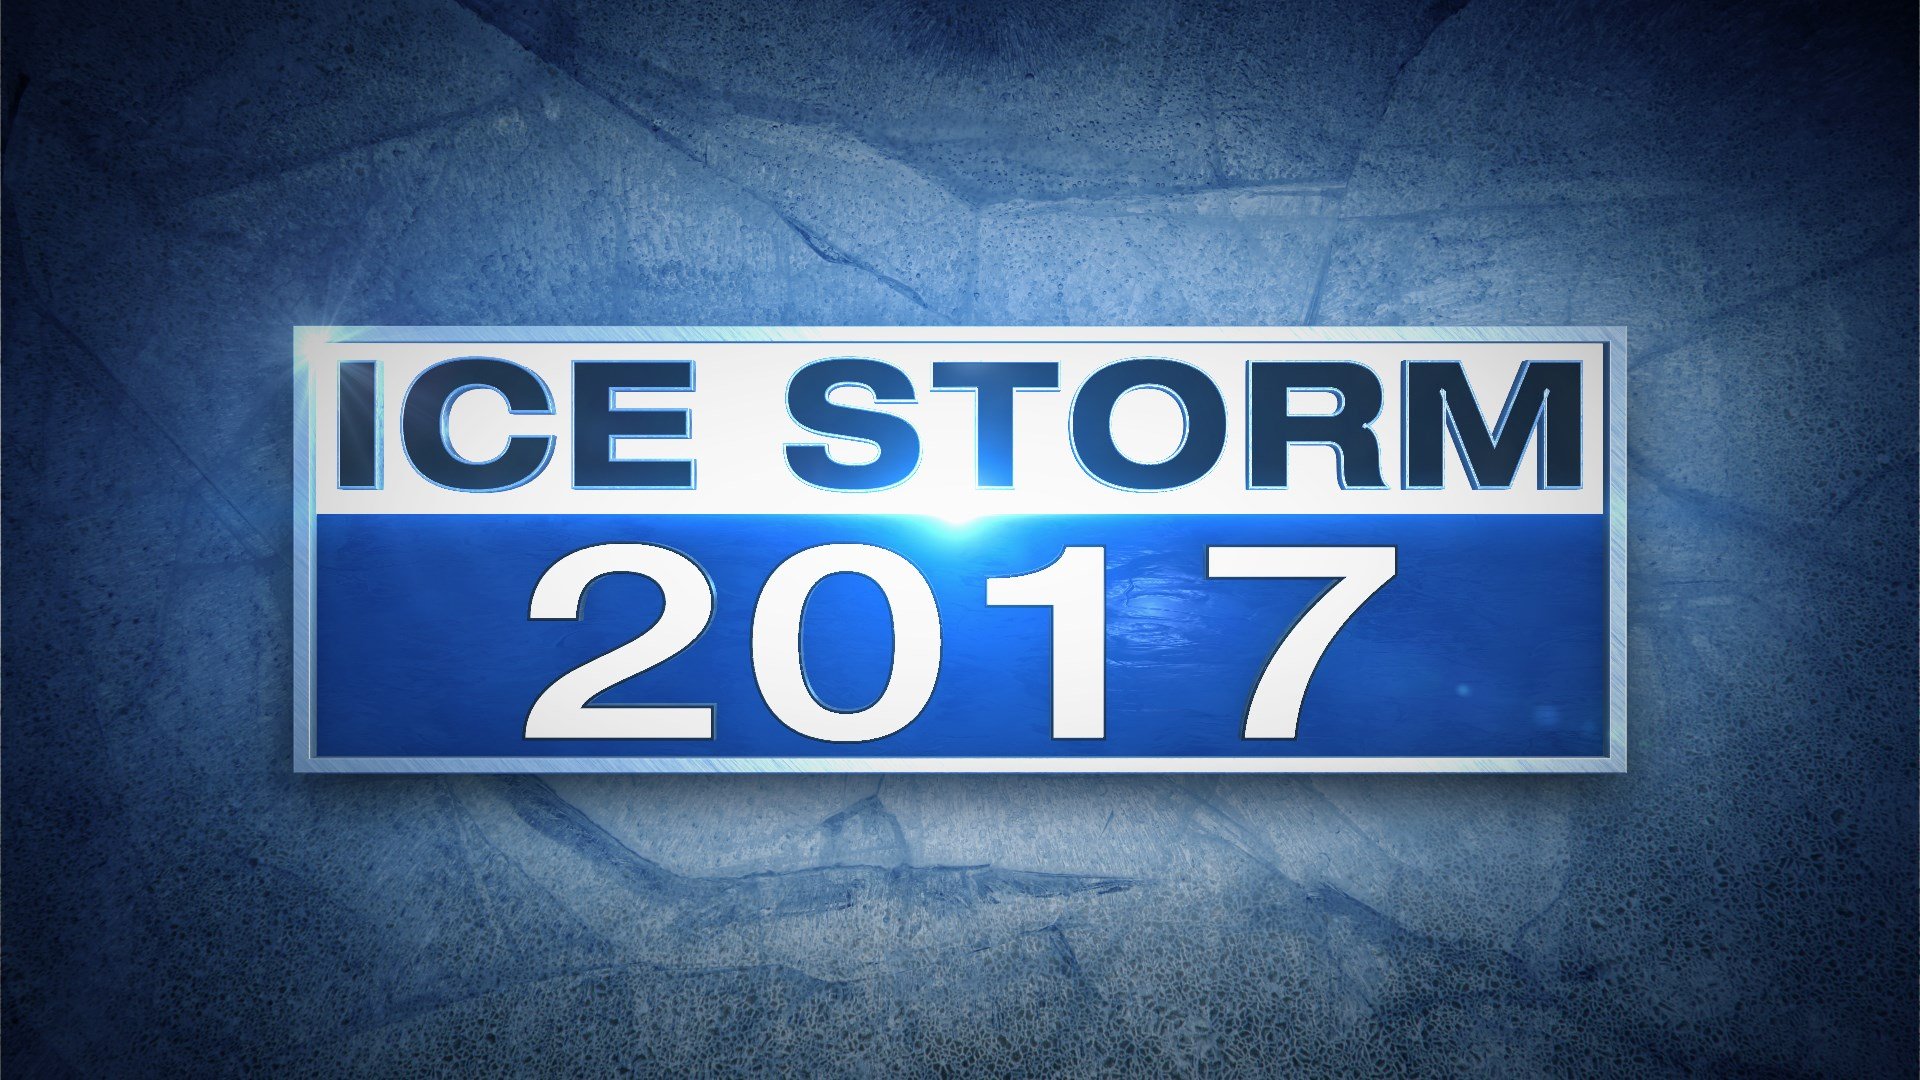 Ongoing updates: The latest on the ice storm moving through the area